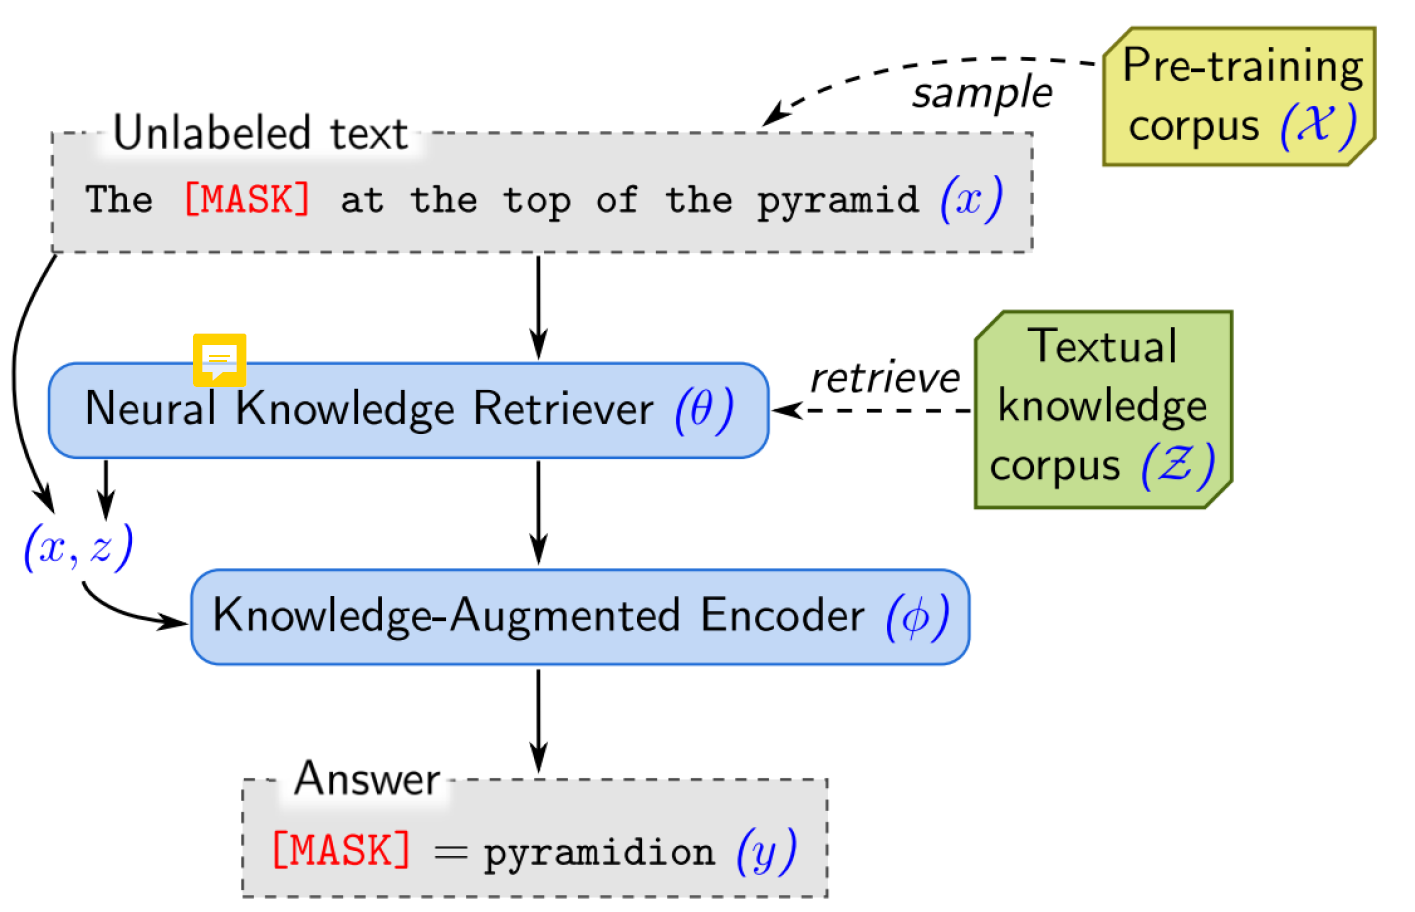 <p>It uses neural knowledge retriever (BERT-like) embedding models to retrieve knowledge from the textual knowledge corpus, which gets fed to a knowledge-augmented encoder alongside the actual input</p>